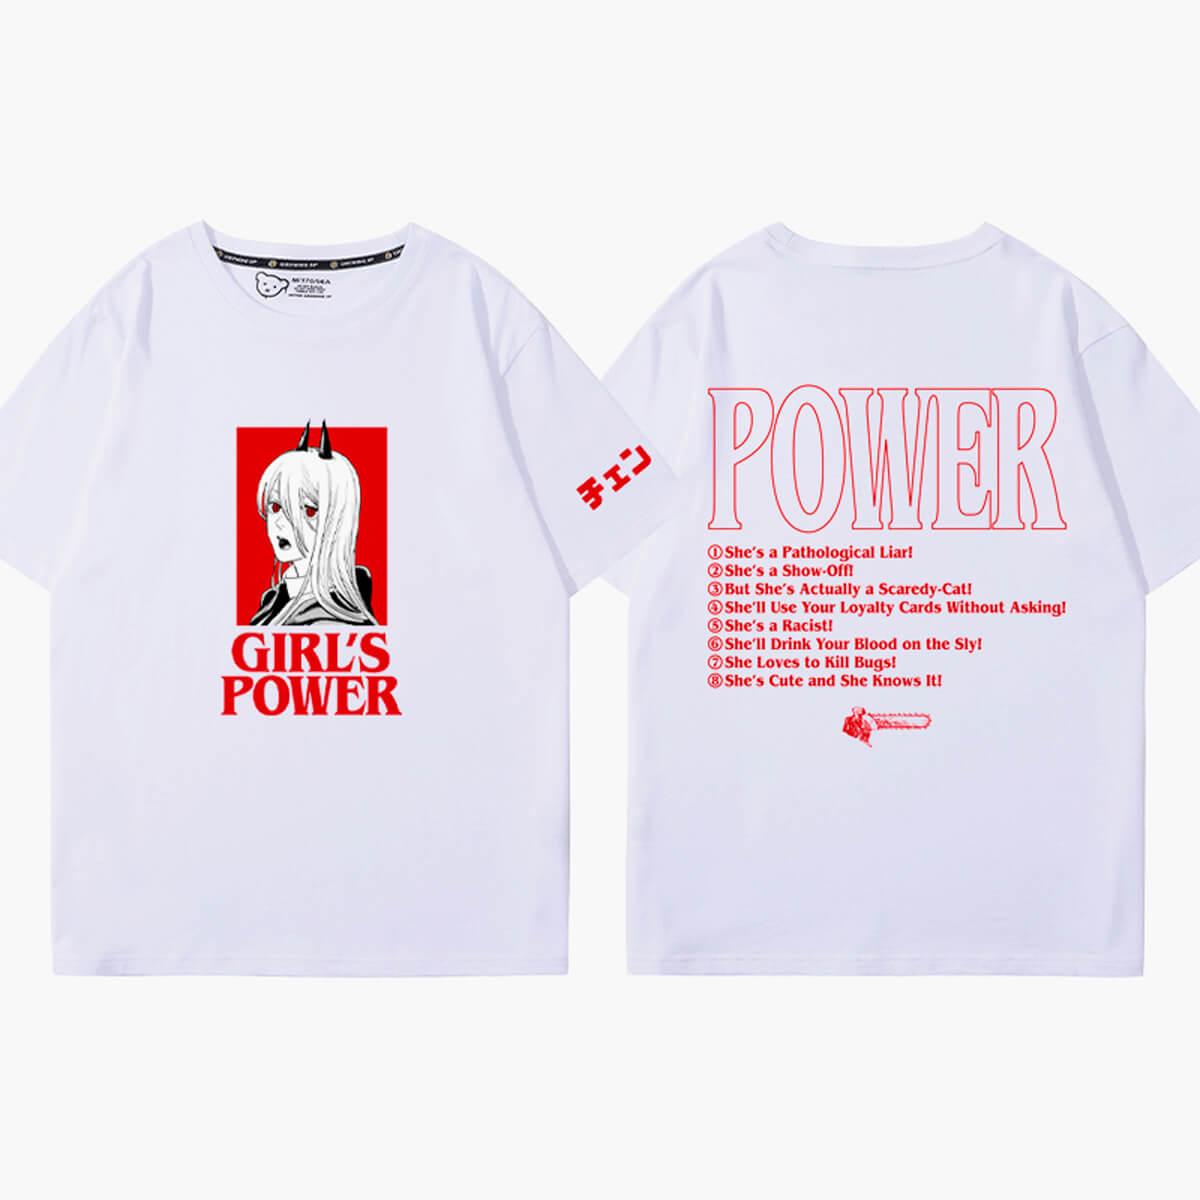 Chainsaw Man Girls Power Animecore T-Shirt - Aesthetic Clothes Shop